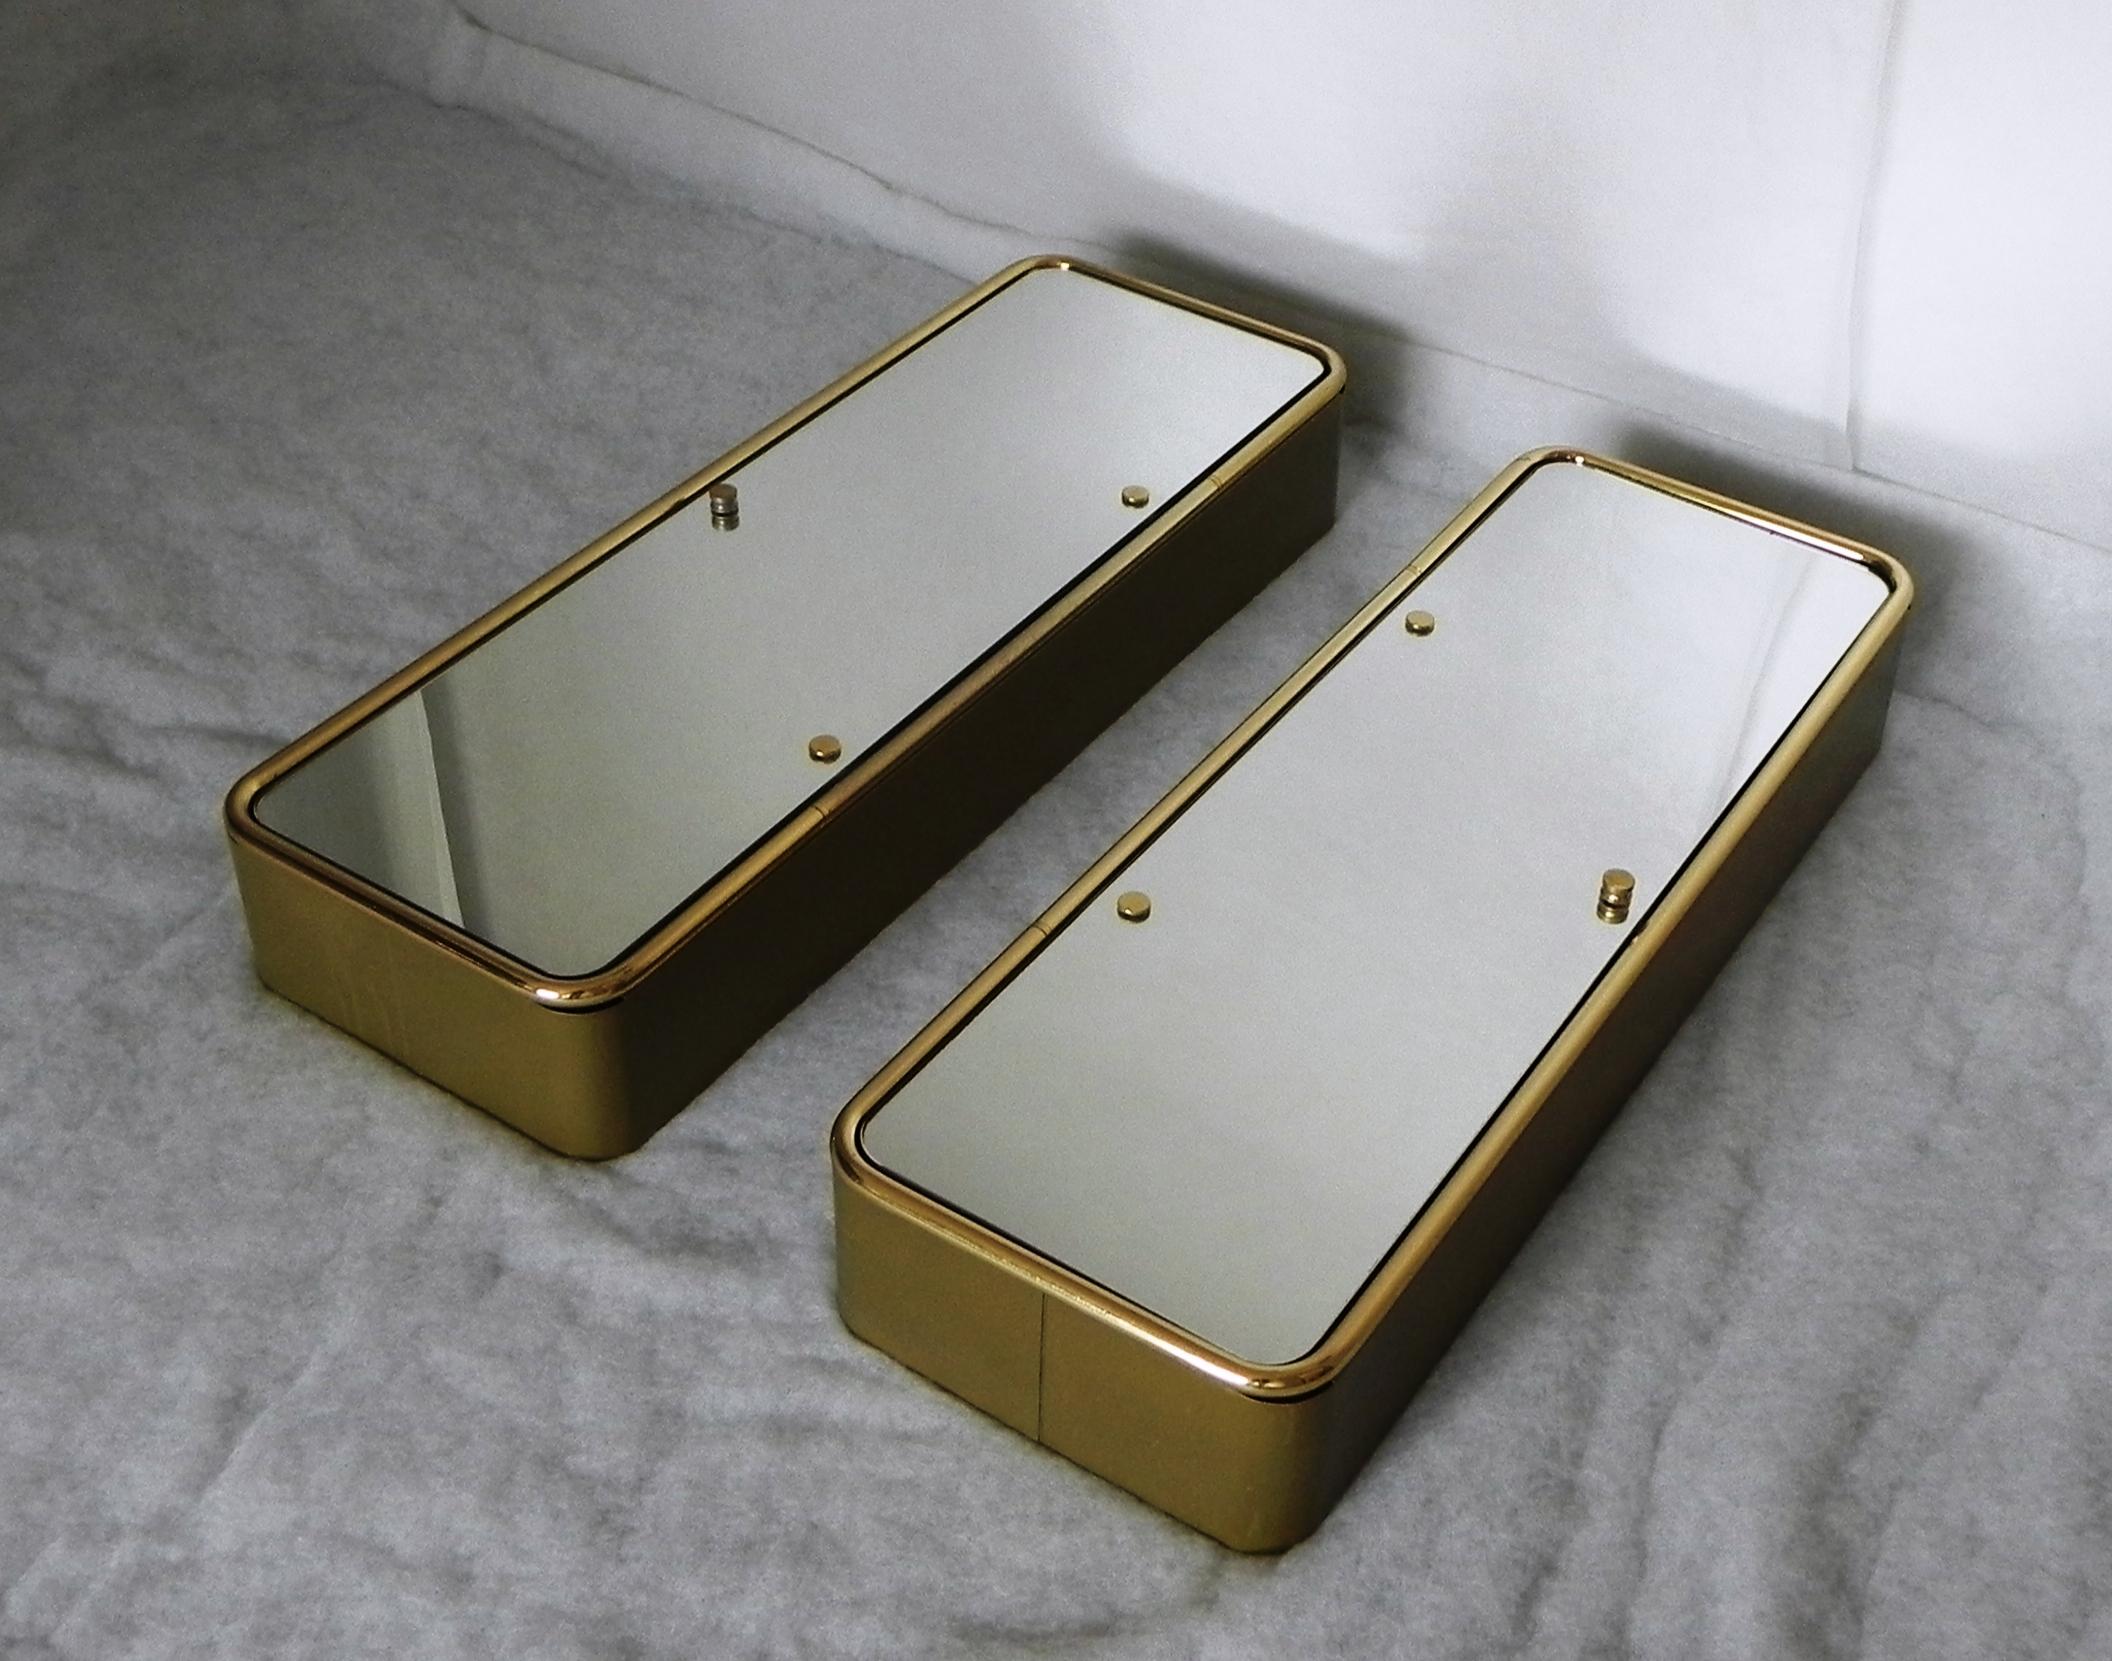 pair of bathroom storage cabinets, with mirrored doors. gold lacquered heavy metal frame, double-sided double-thickness mirror doors, crystal interior shelves. doors can be right or left. the product is of great quality construction and materials,